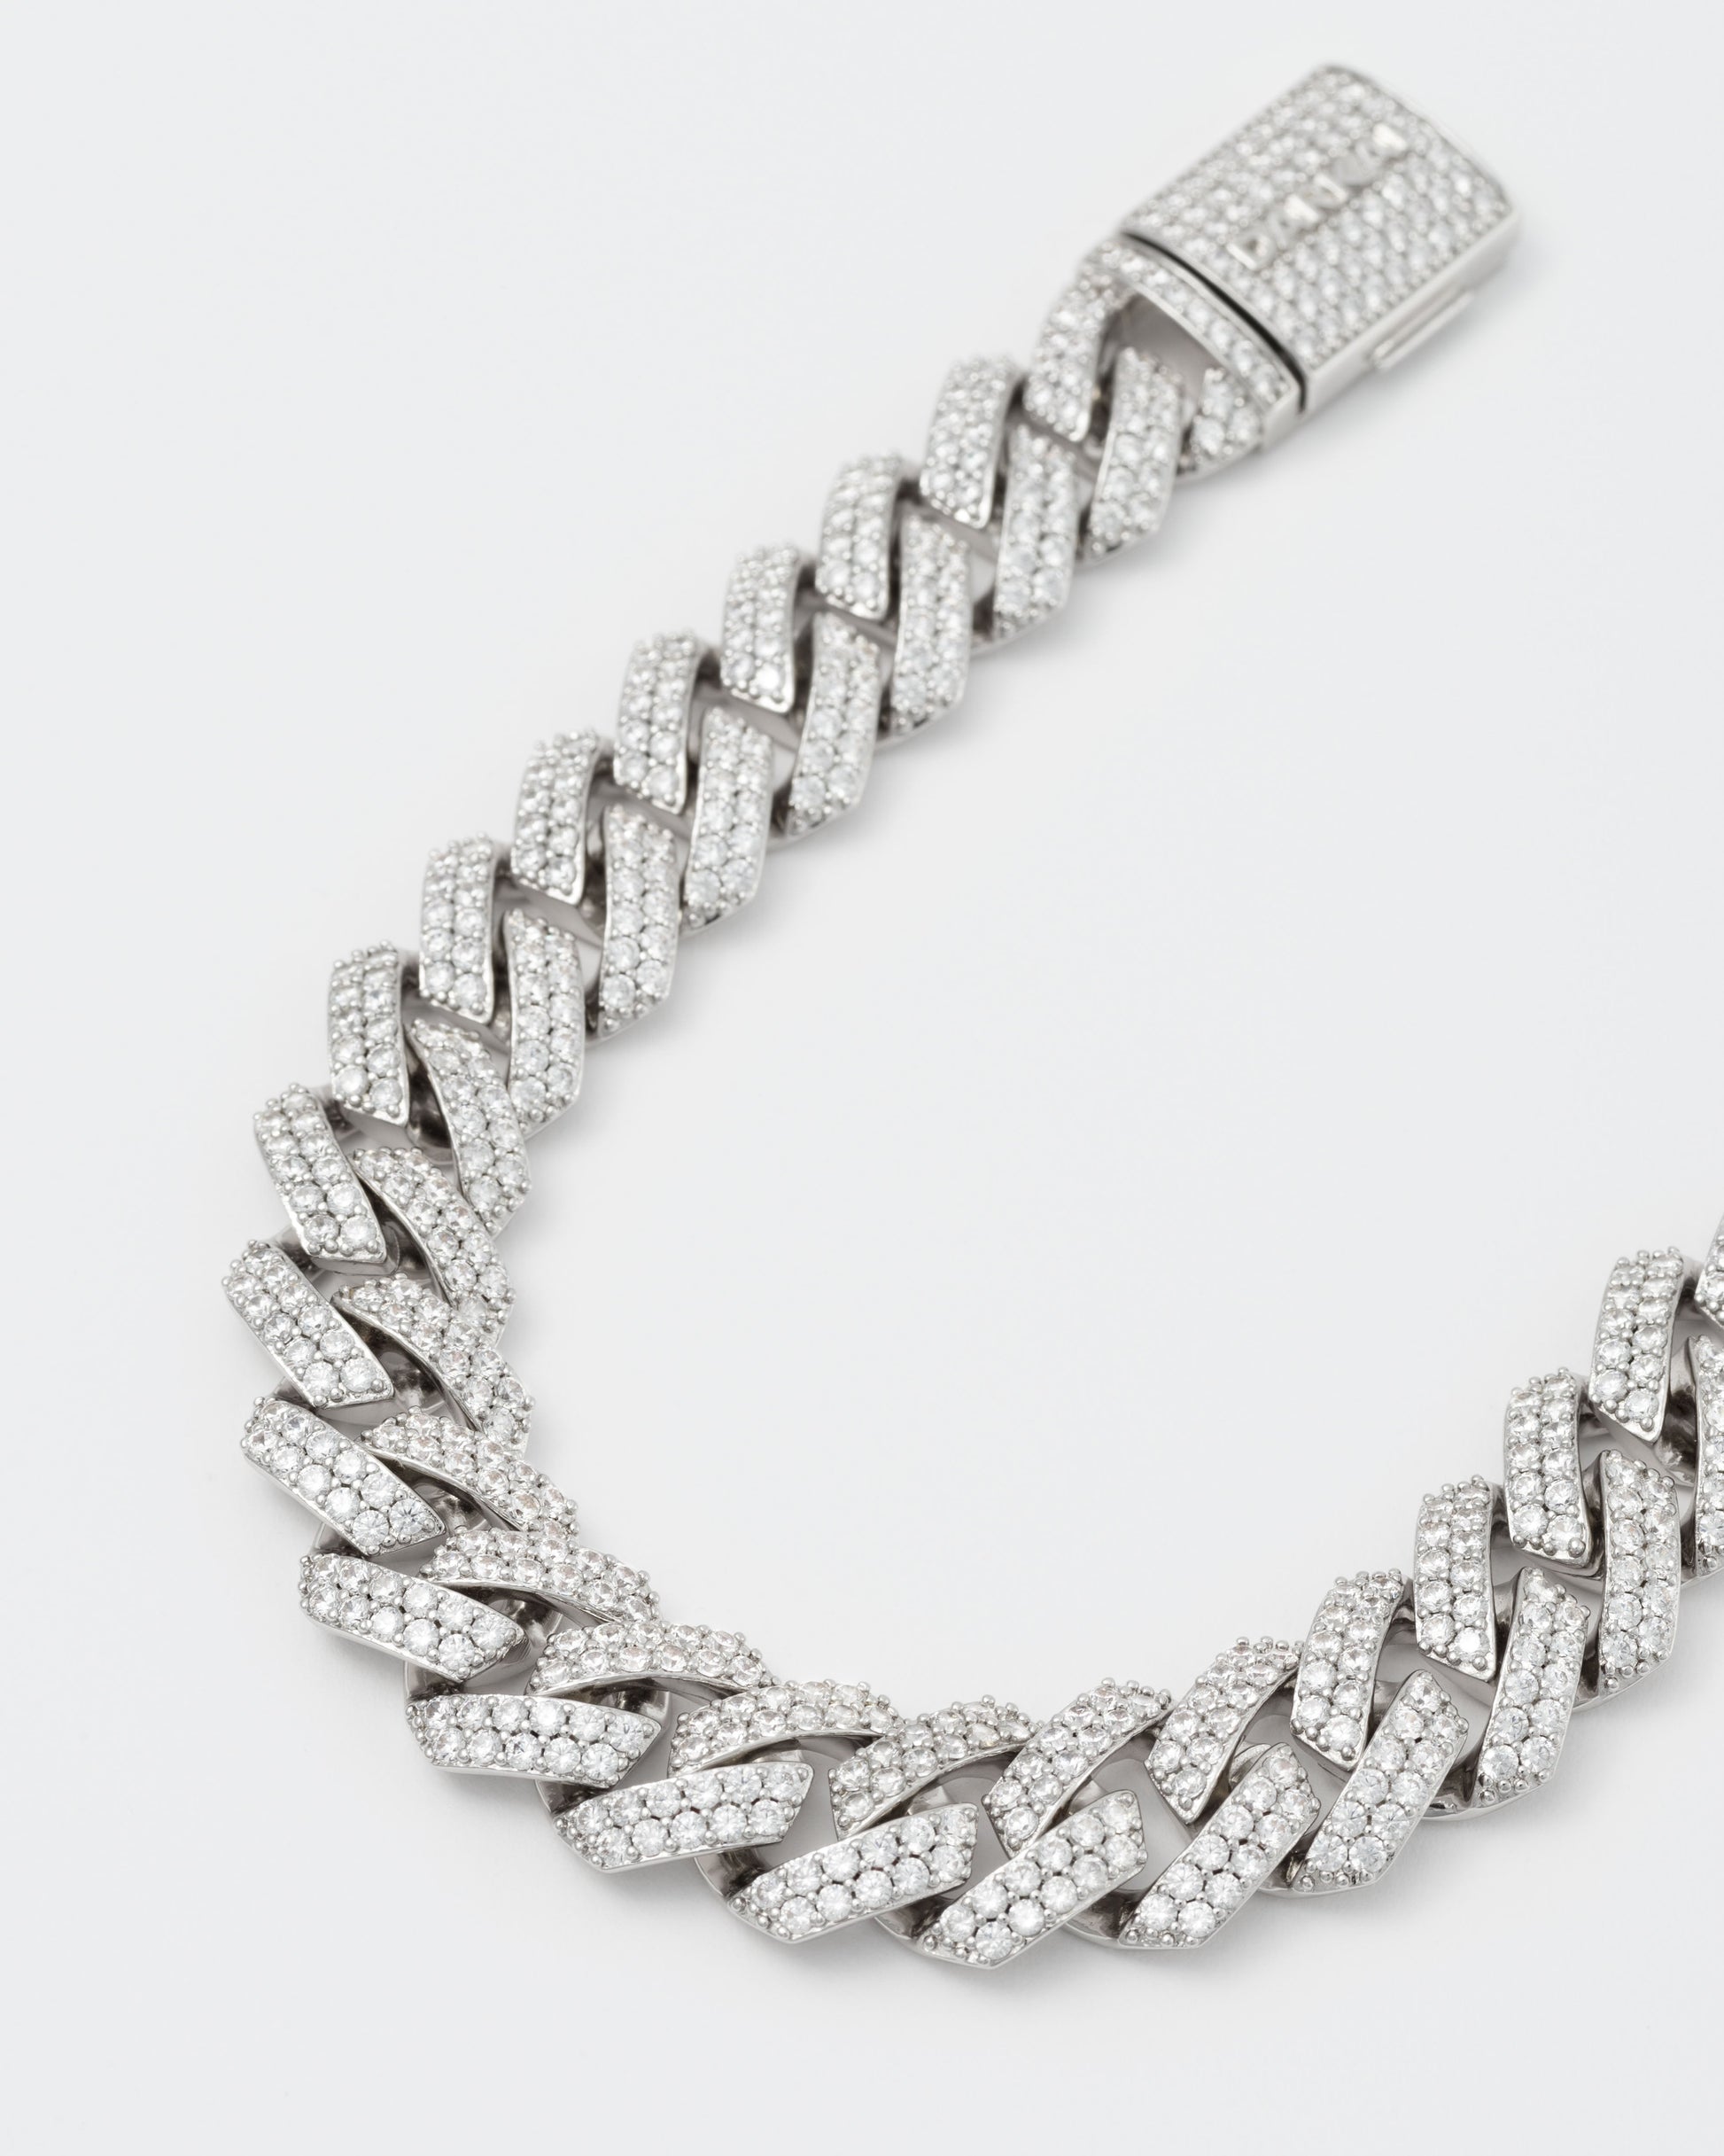 detail of 18k white gold coated prong chain necklace with hand-set micropavé stones in white